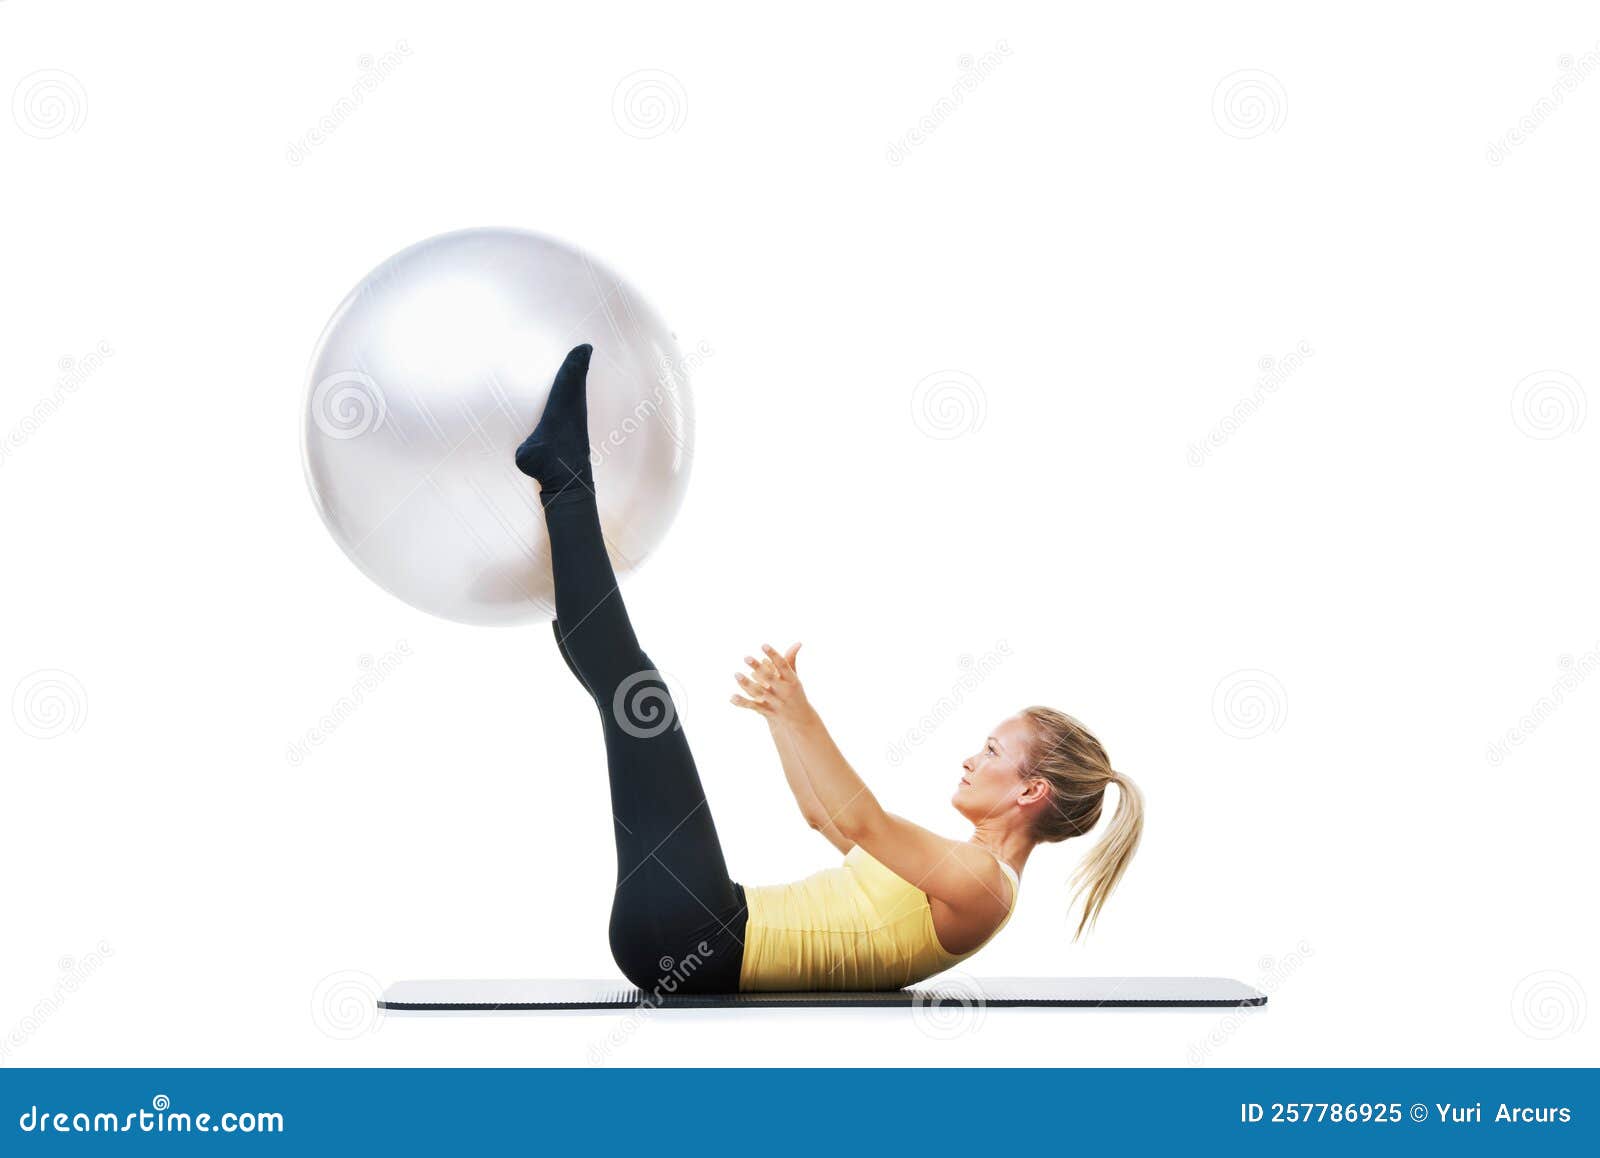 Working On Toning My Stomach A Female Lifting An Exercise Ball Up With Her Legs Stock Image